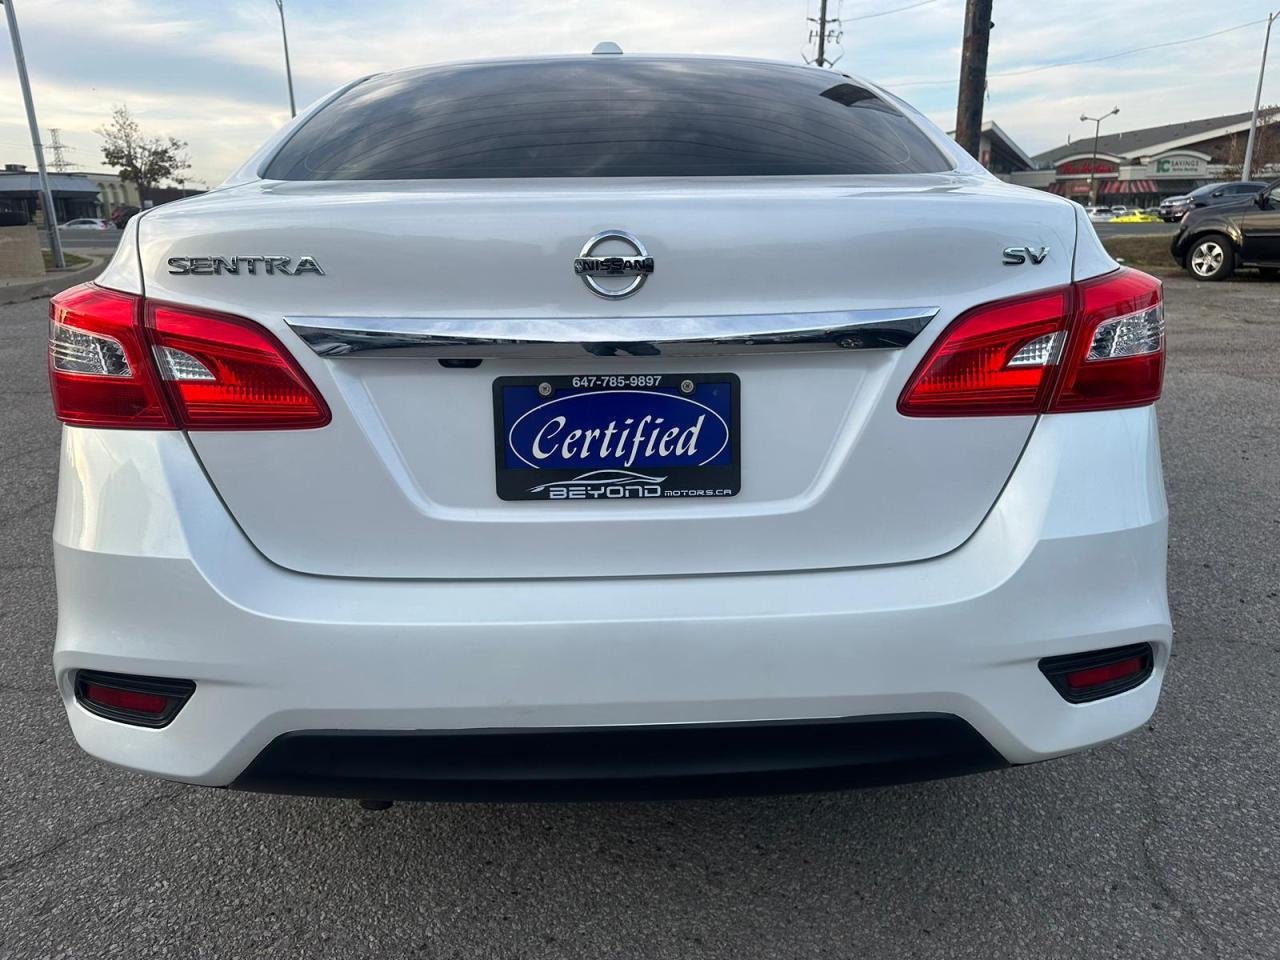 2018 Nissan Sentra SV CERTIFIED WITH 3 YEARS WARRANTY INCLUDED - Photo #16